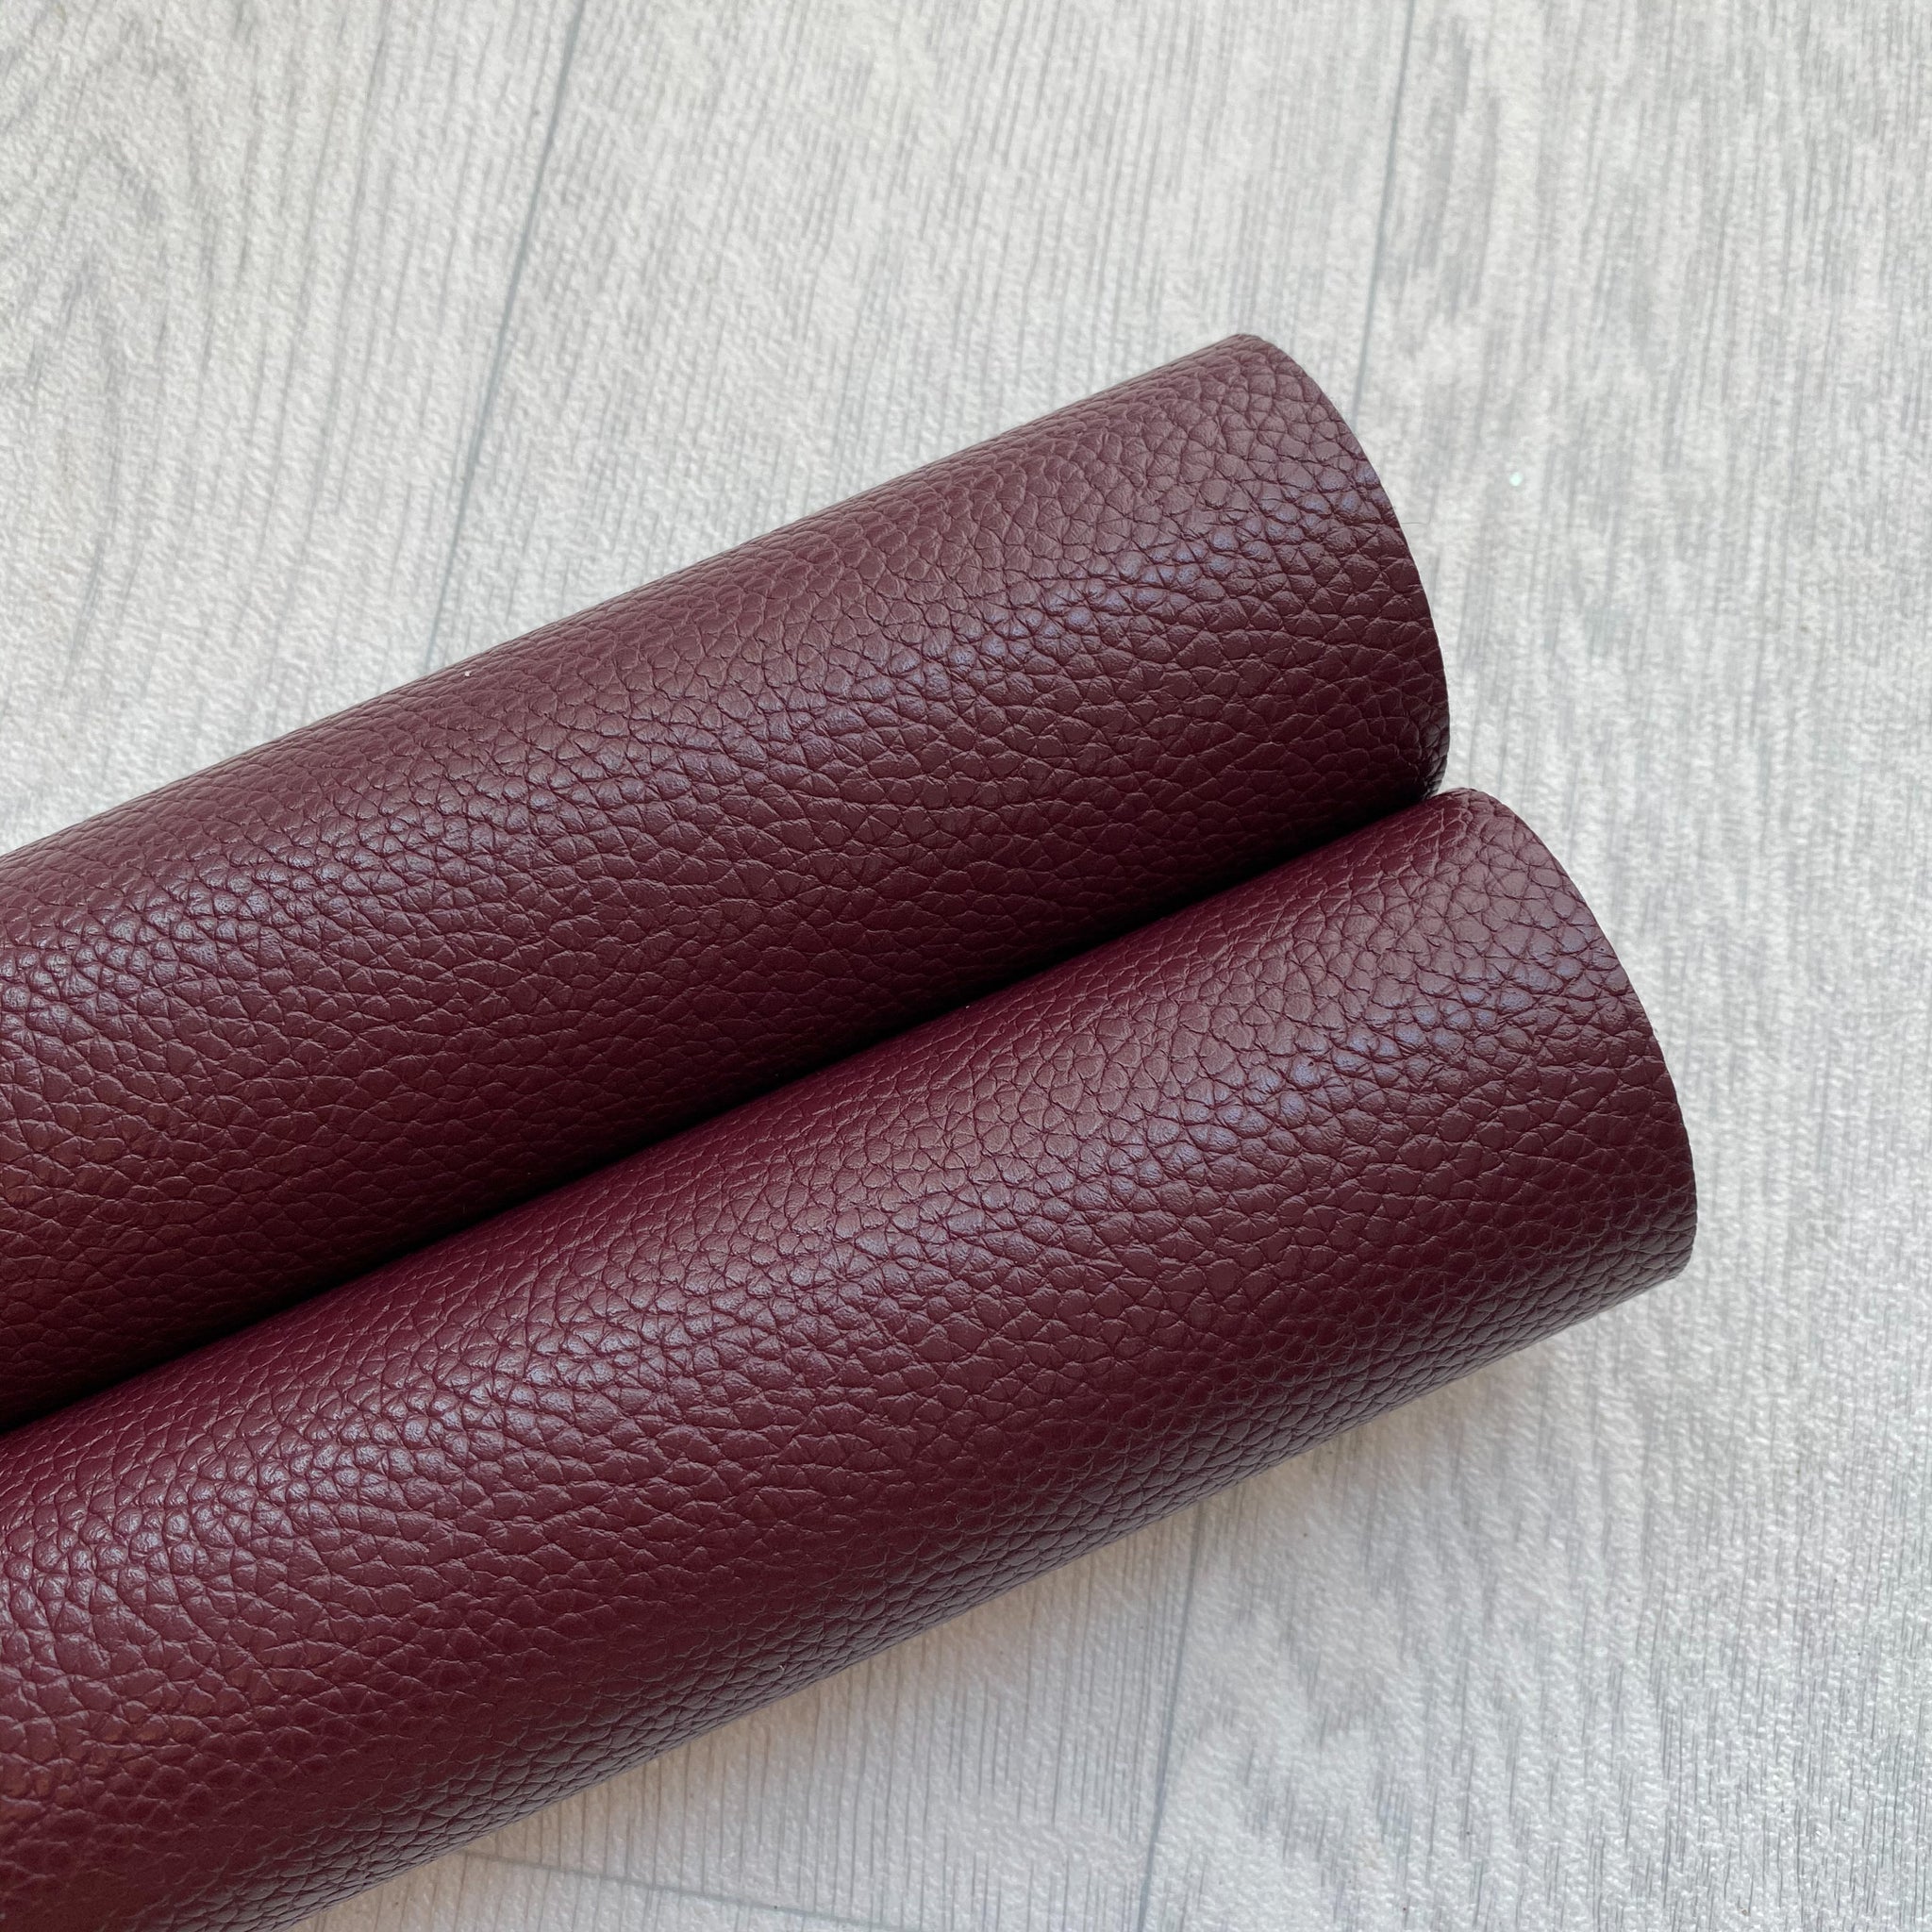 Burgundy Faux Leather